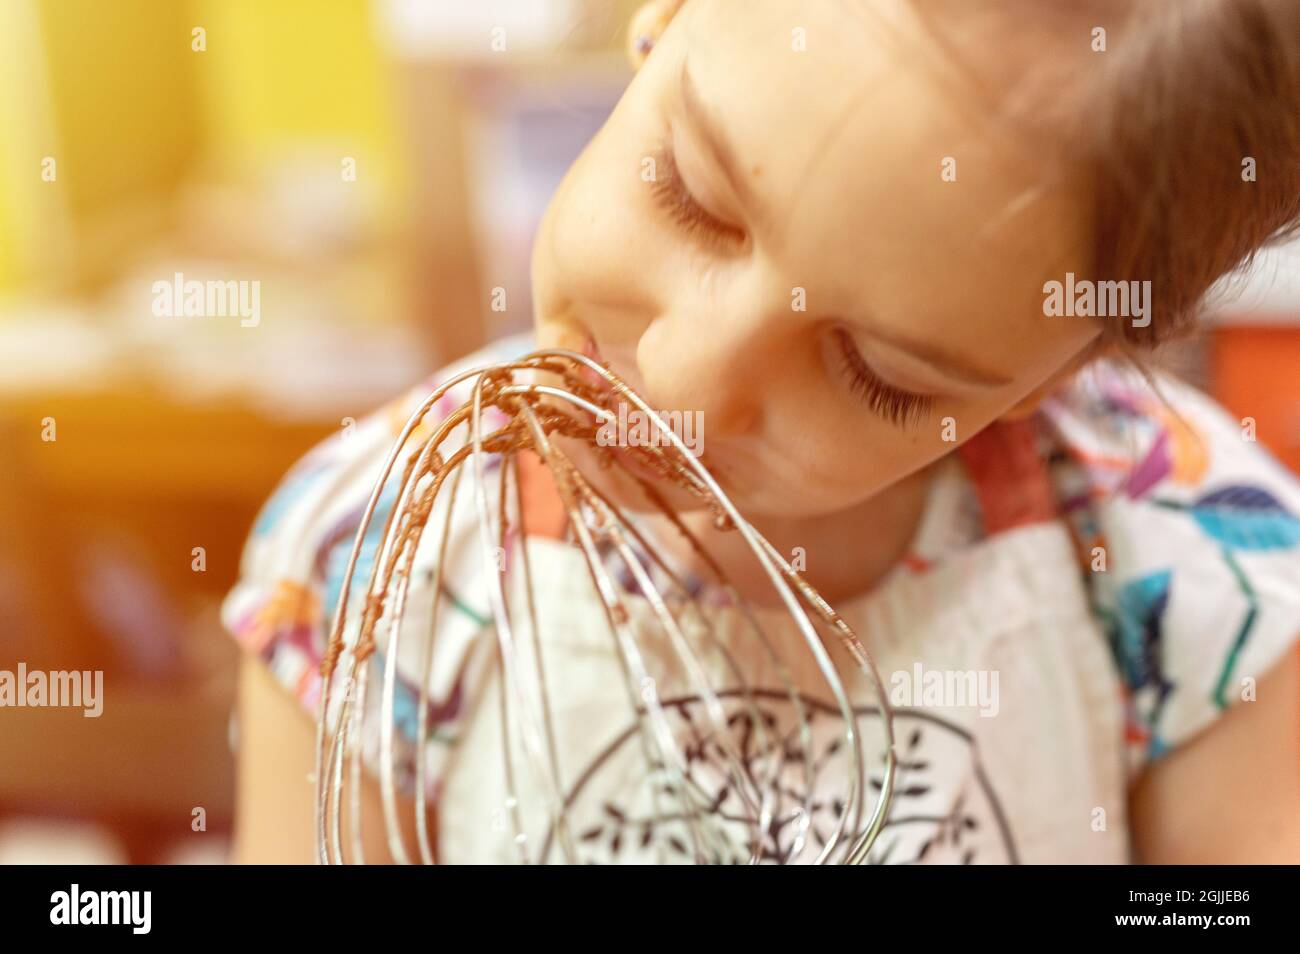 1849 Whipping girl Stock Photo - Alamy